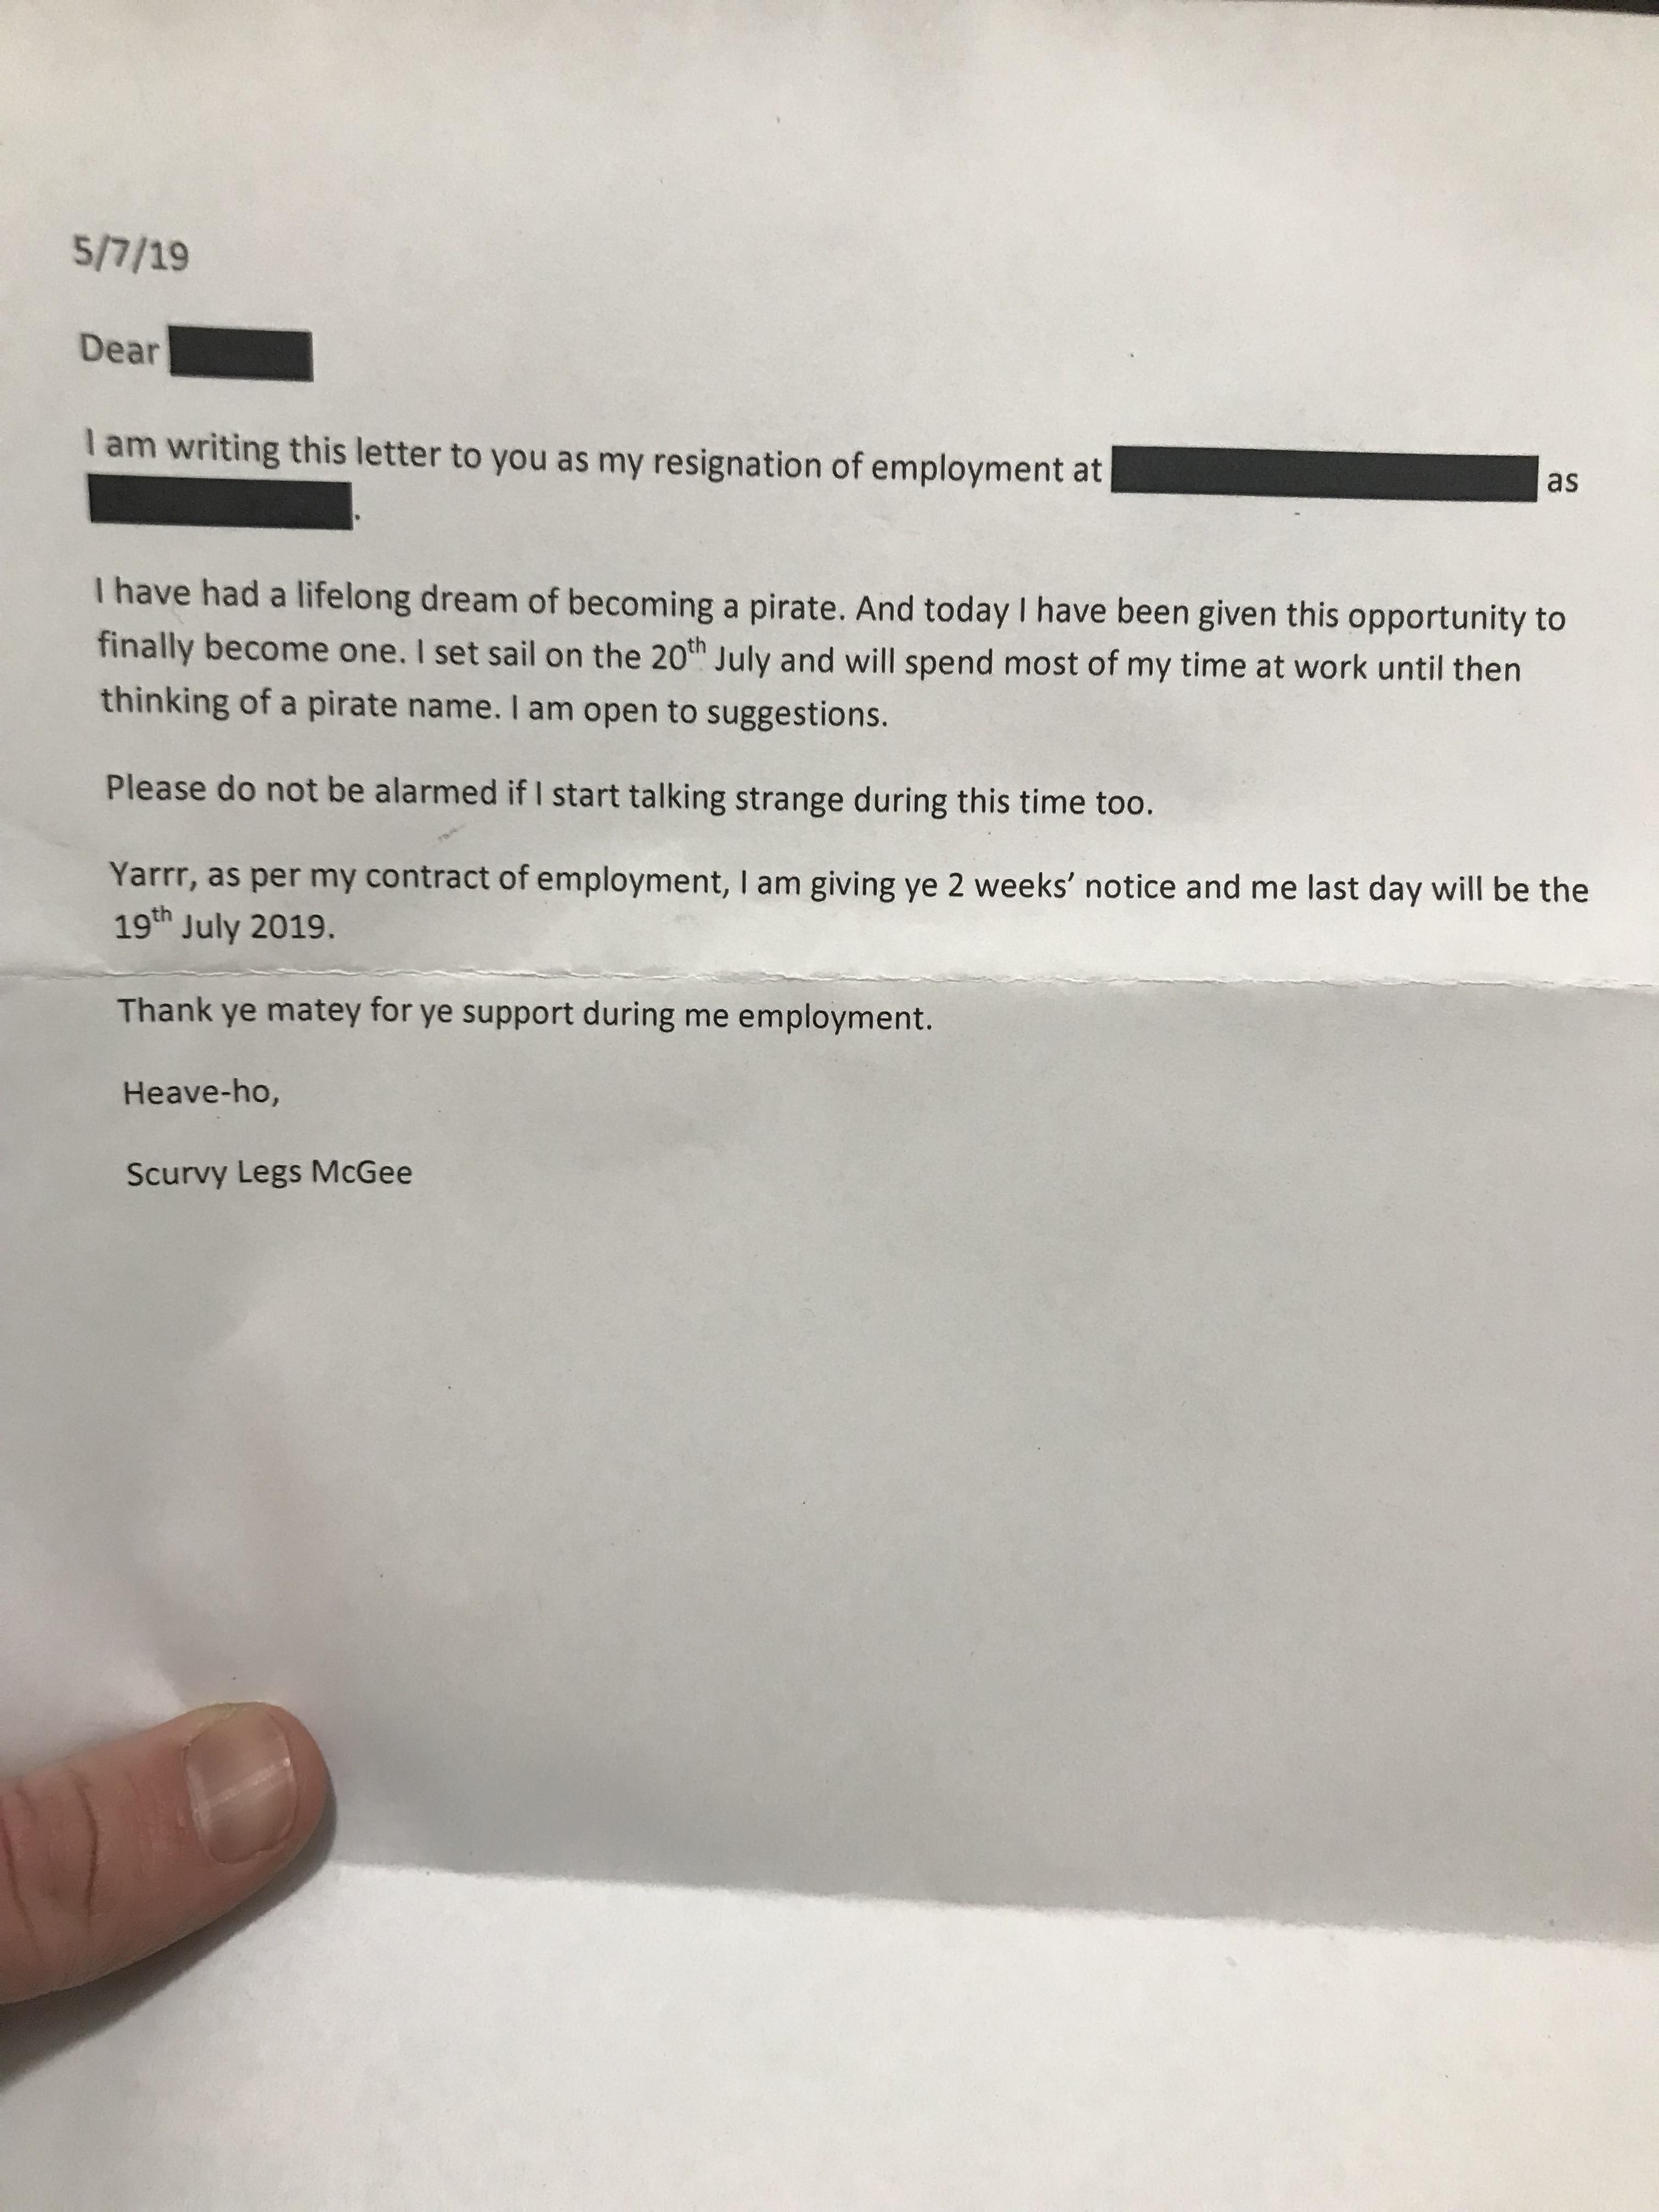 I helped a work mate with his resignation letter. Not sure why he didn't use it?